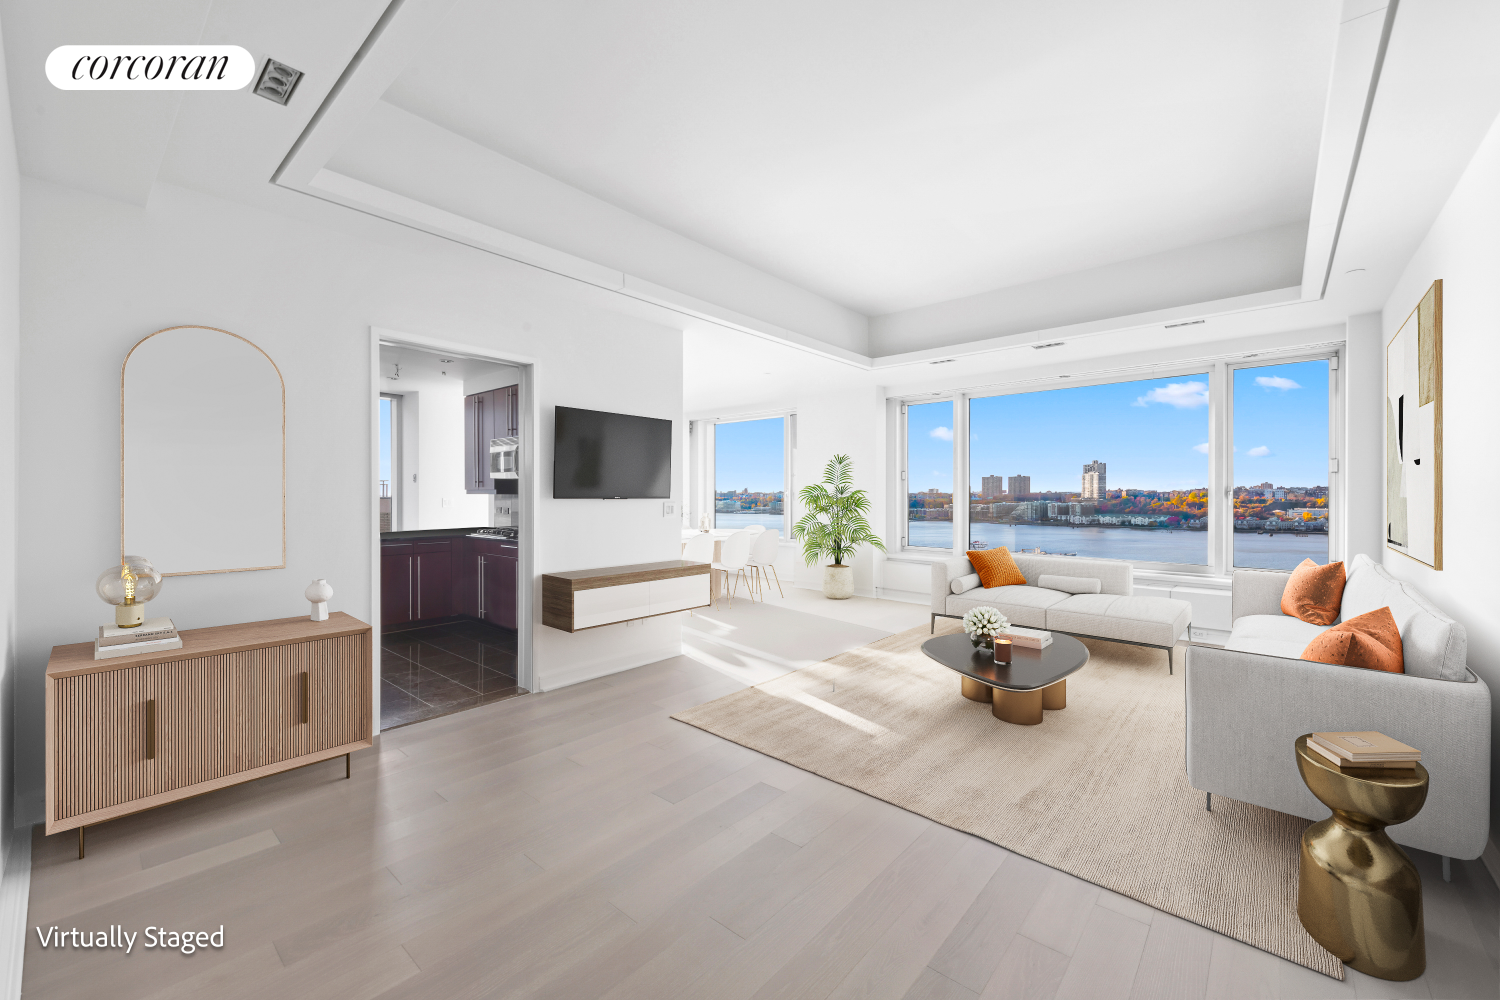 240 Riverside Boulevard 15E, Lincoln Sq, Upper West Side, NYC - 3 Bedrooms  
3 Bathrooms  
6 Rooms - 